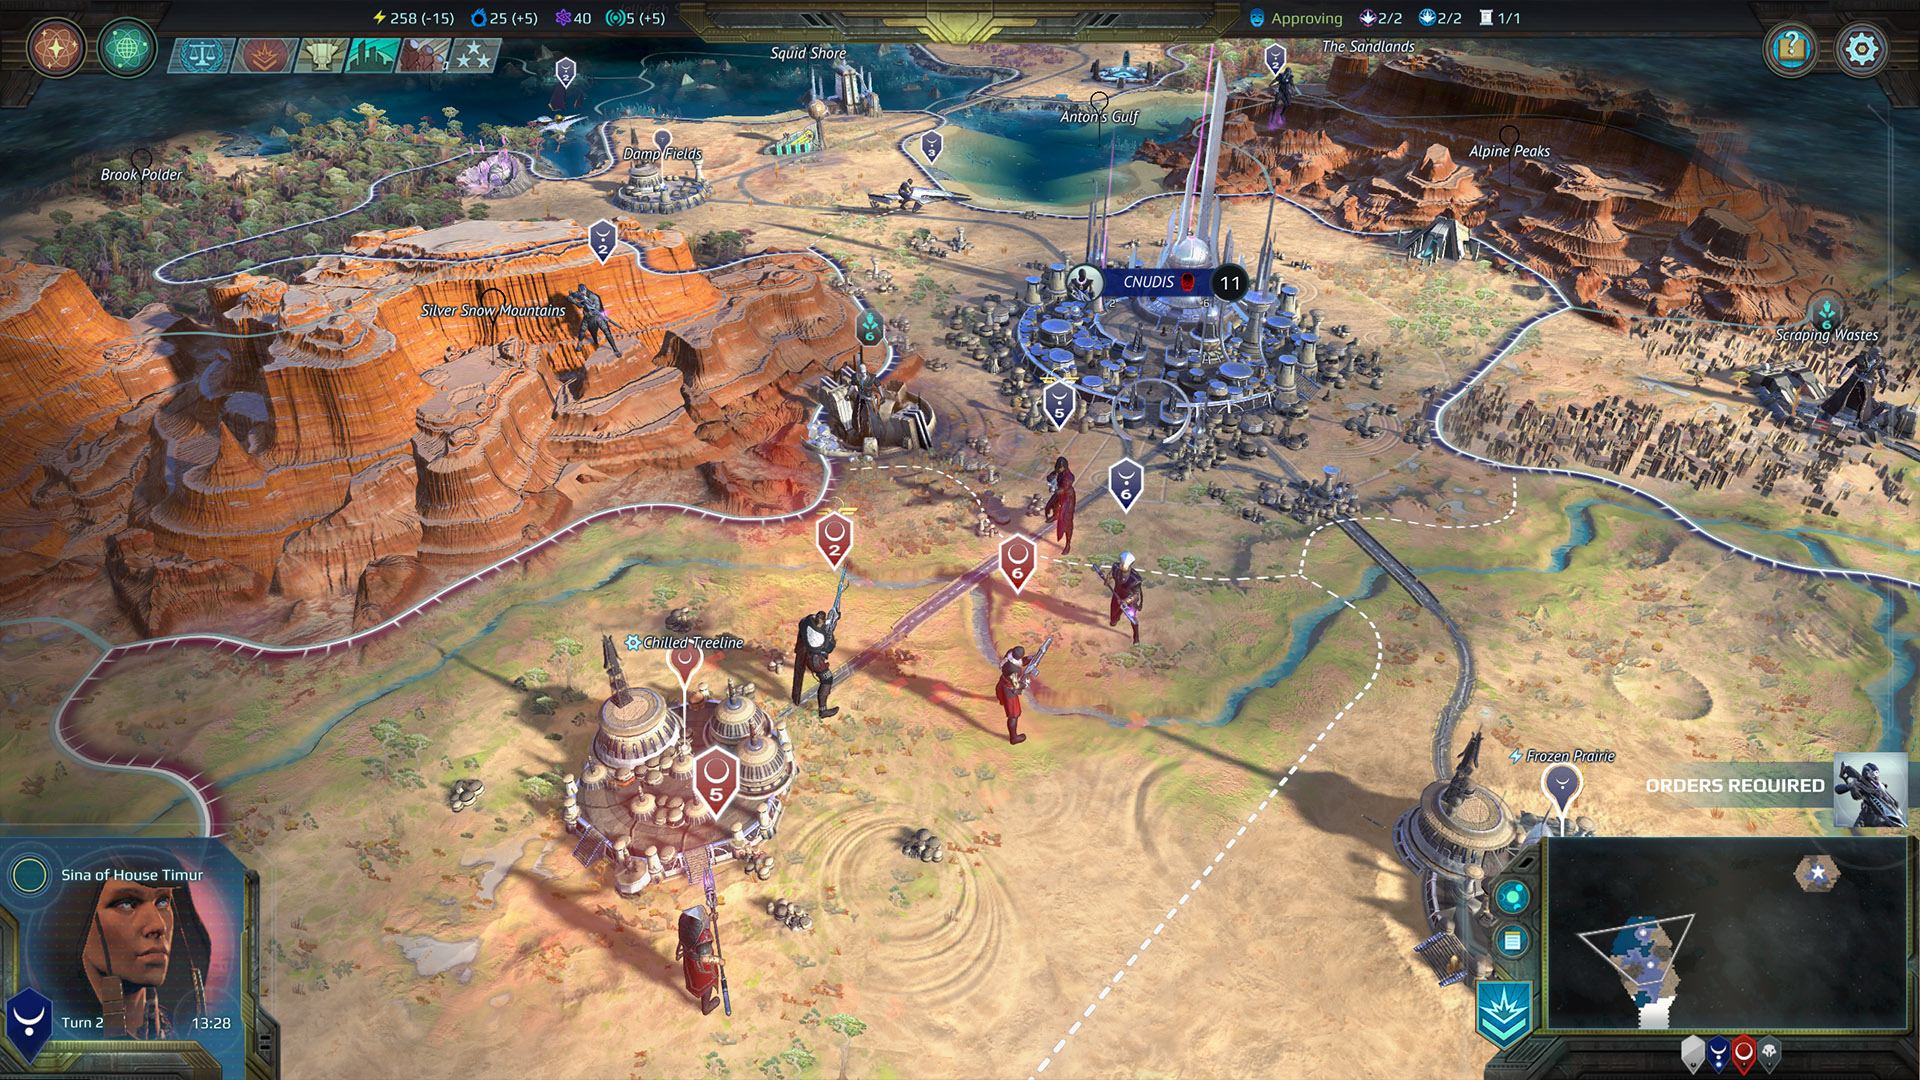 Age of Wonders, Age of Wonders: Planetfall, Age of Wonders: Planetfall Review, Economy, Paradox Interactive, PS4, PS4 Review, Rating 8/10, Sci-Fi, strategy, Triumph Studios, turn-based, Turn-Based Strategy